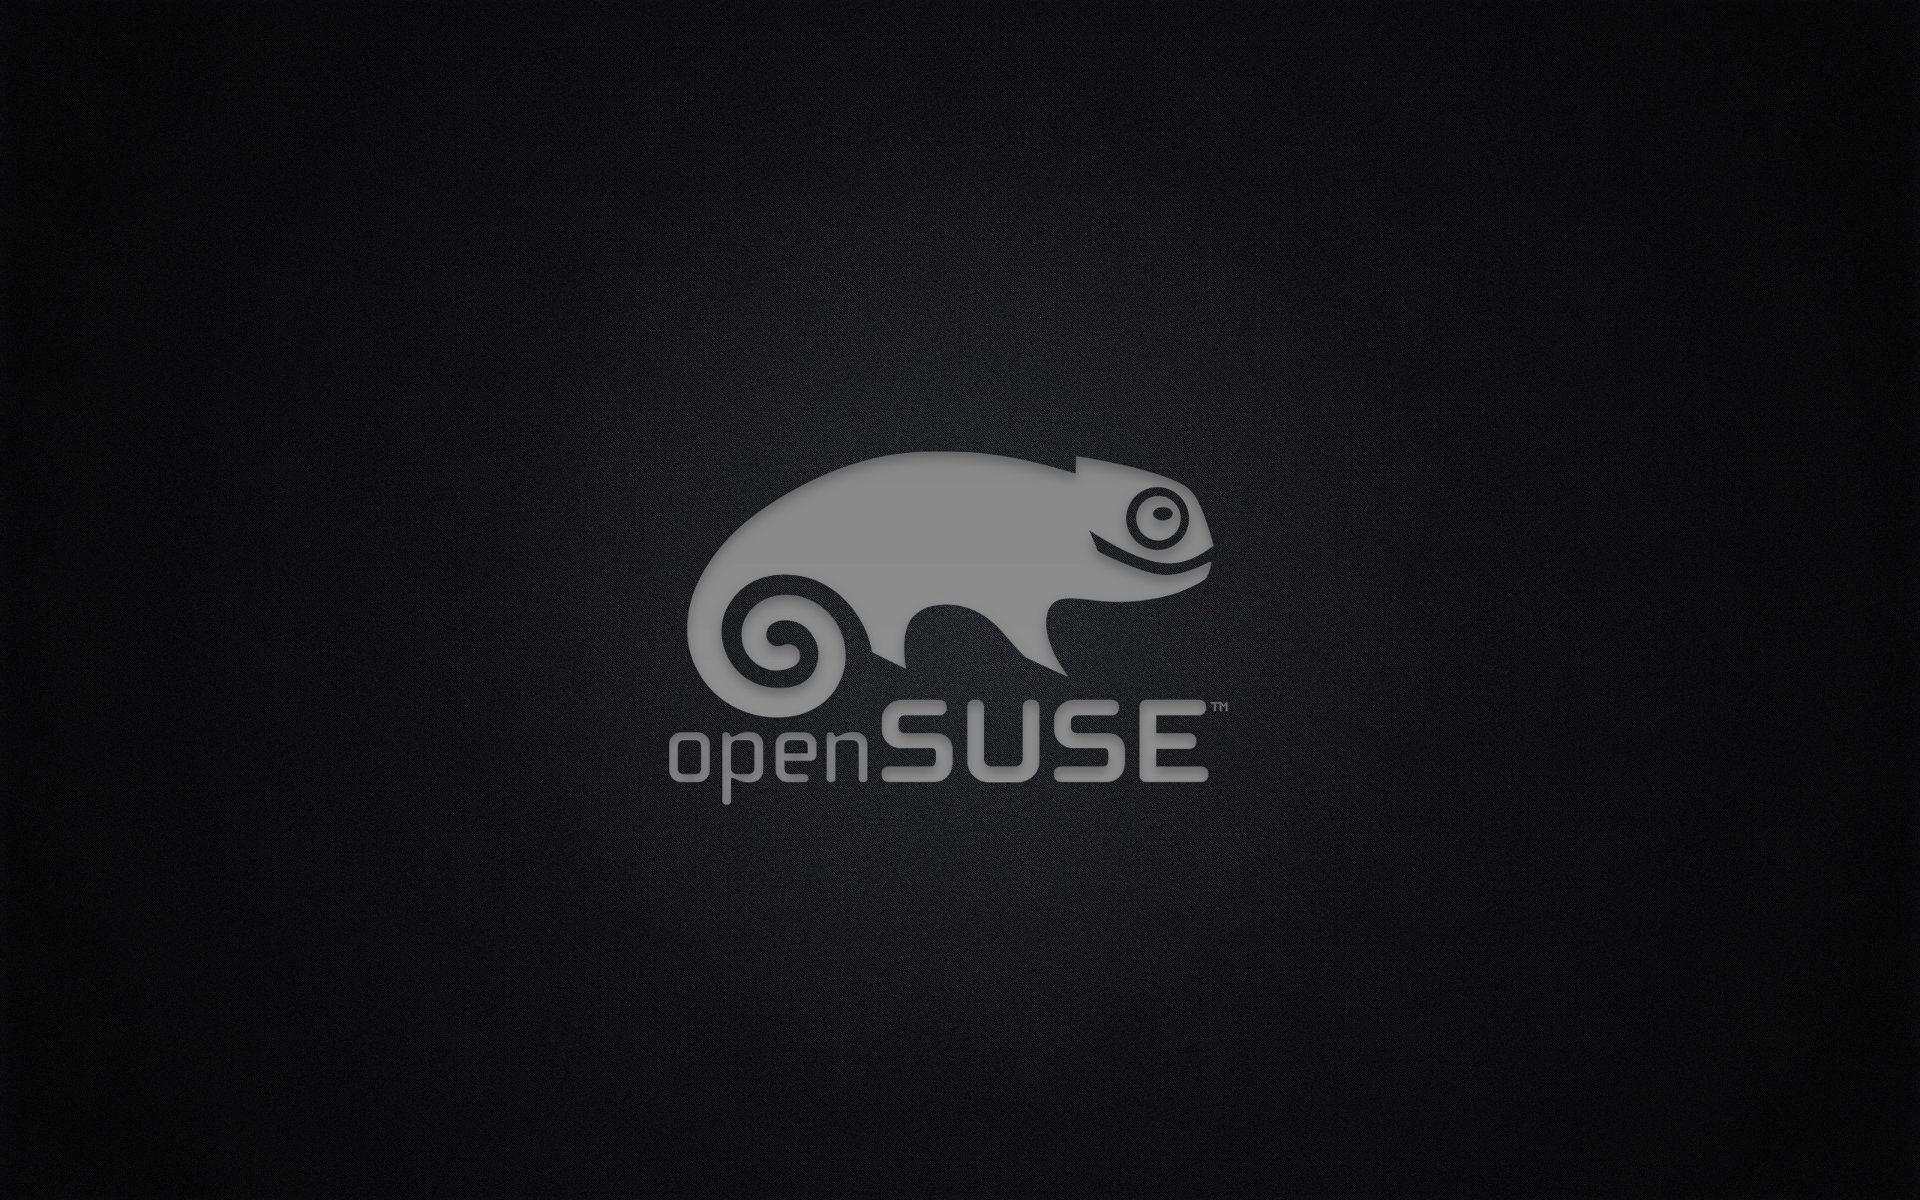 opensuse wallpaper 77118 - Image And Wallpaper free to